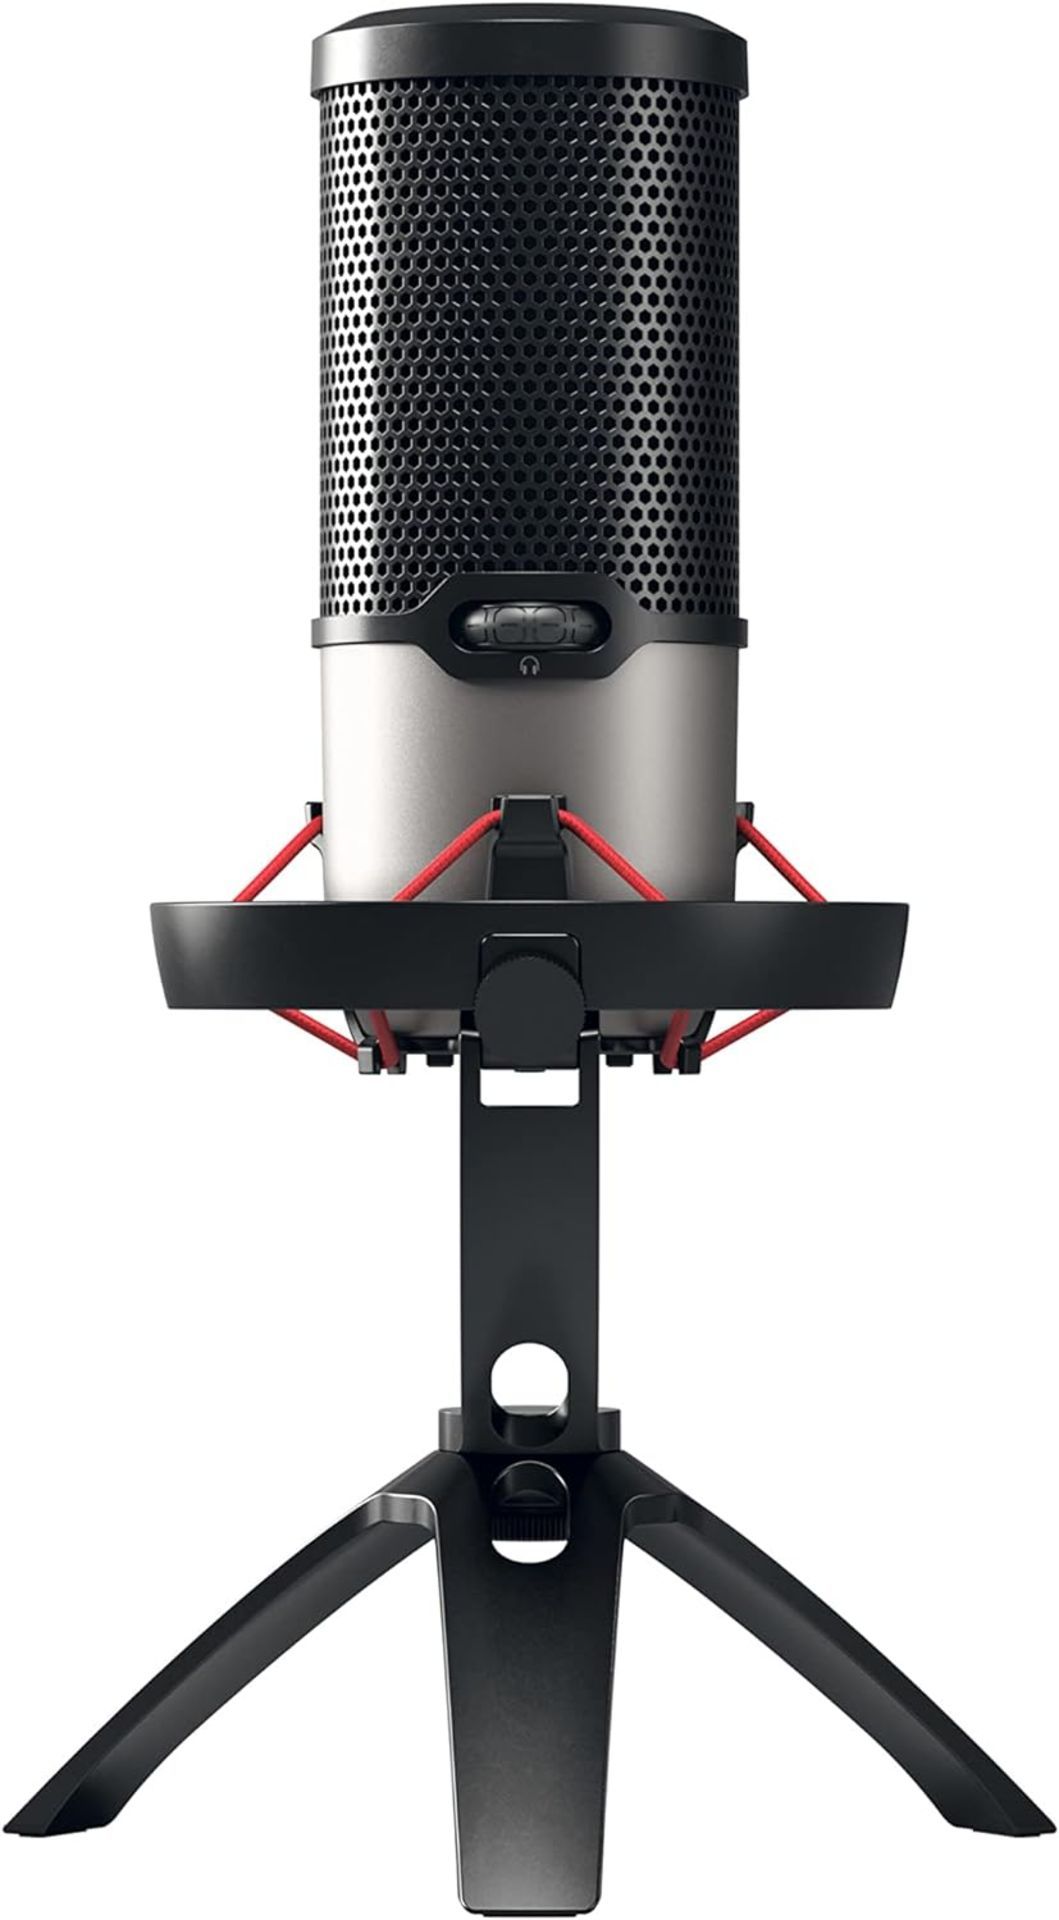 NEW & BOXED CHERRY UM 6.0 Advanced USB Microphone. RRP £89.99. Stylish desktop microphone with USB-C - Image 2 of 7